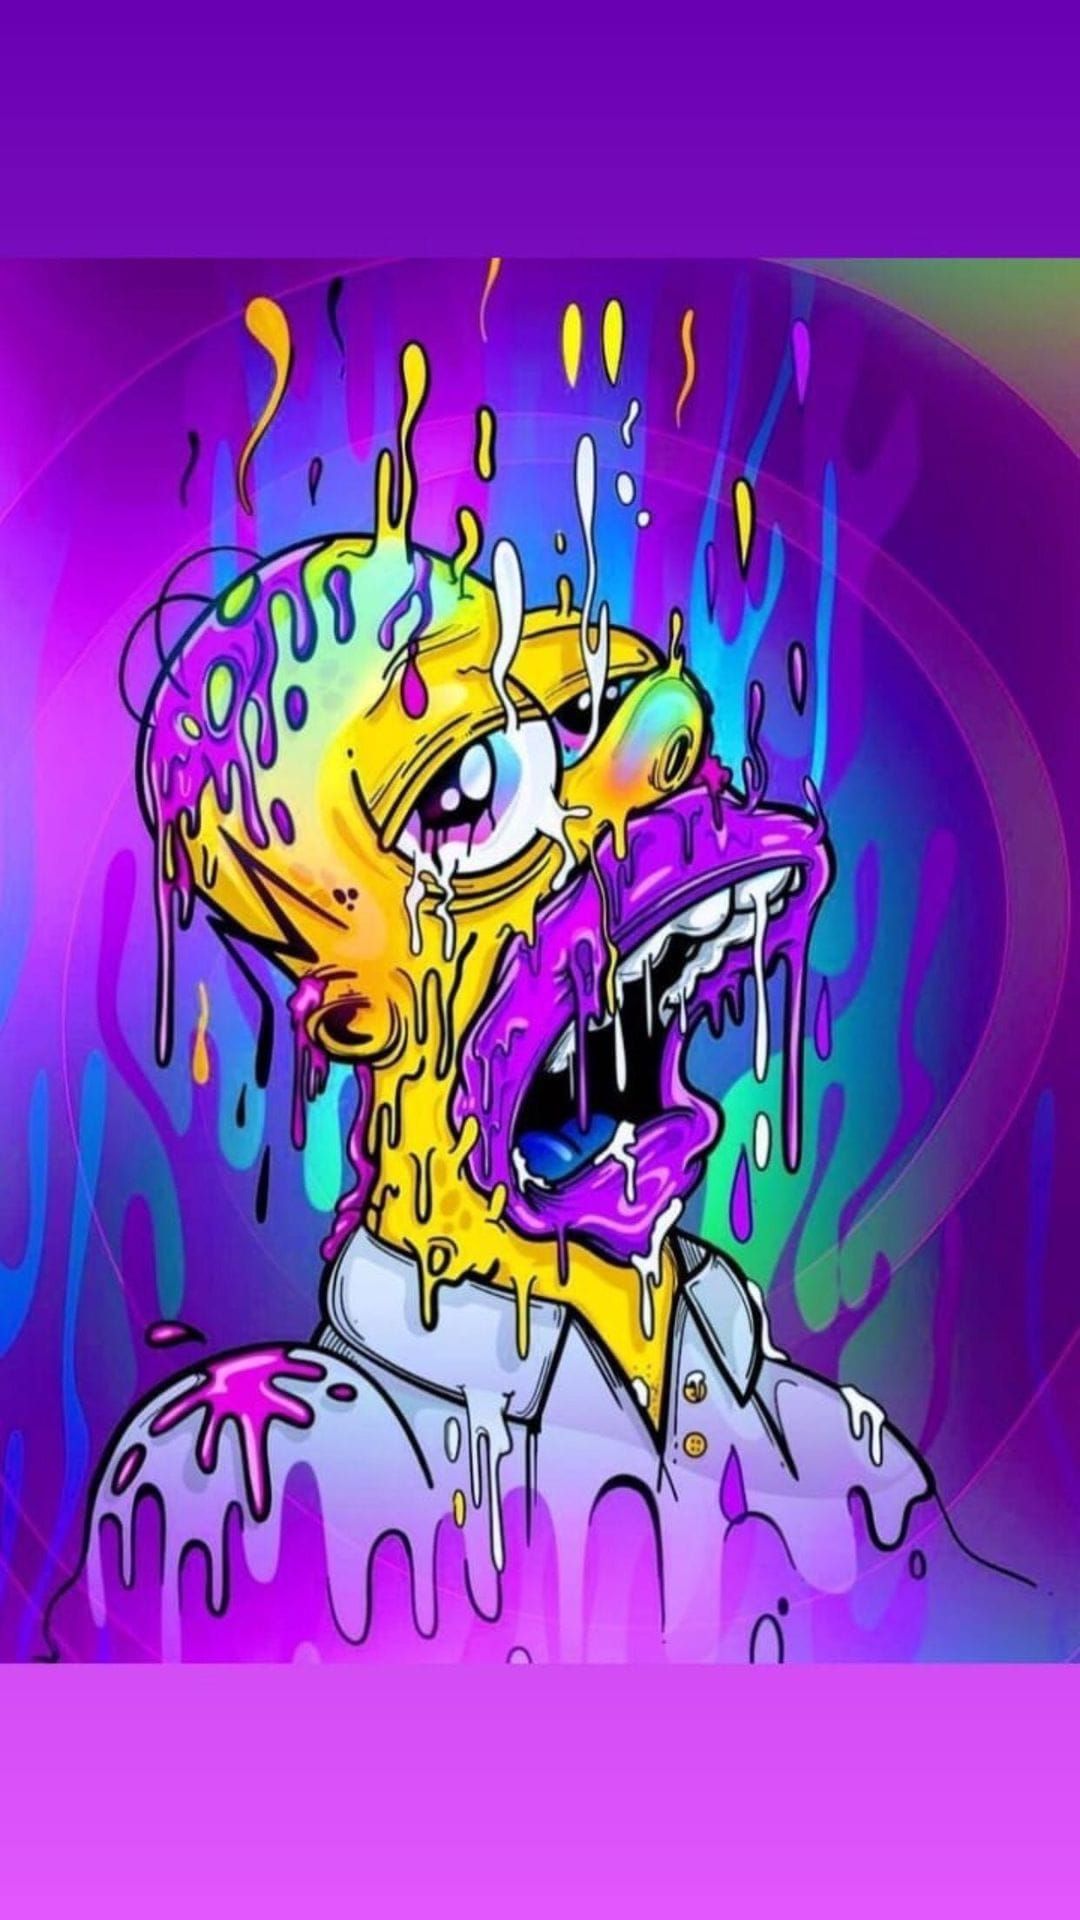 Drippy Wallpaper Discover more Aesthetic, Art, Cute, Drippy, Simpsons wallpaper. /drip. Simpsons art, Simpsons drawings, Trippy cartoon